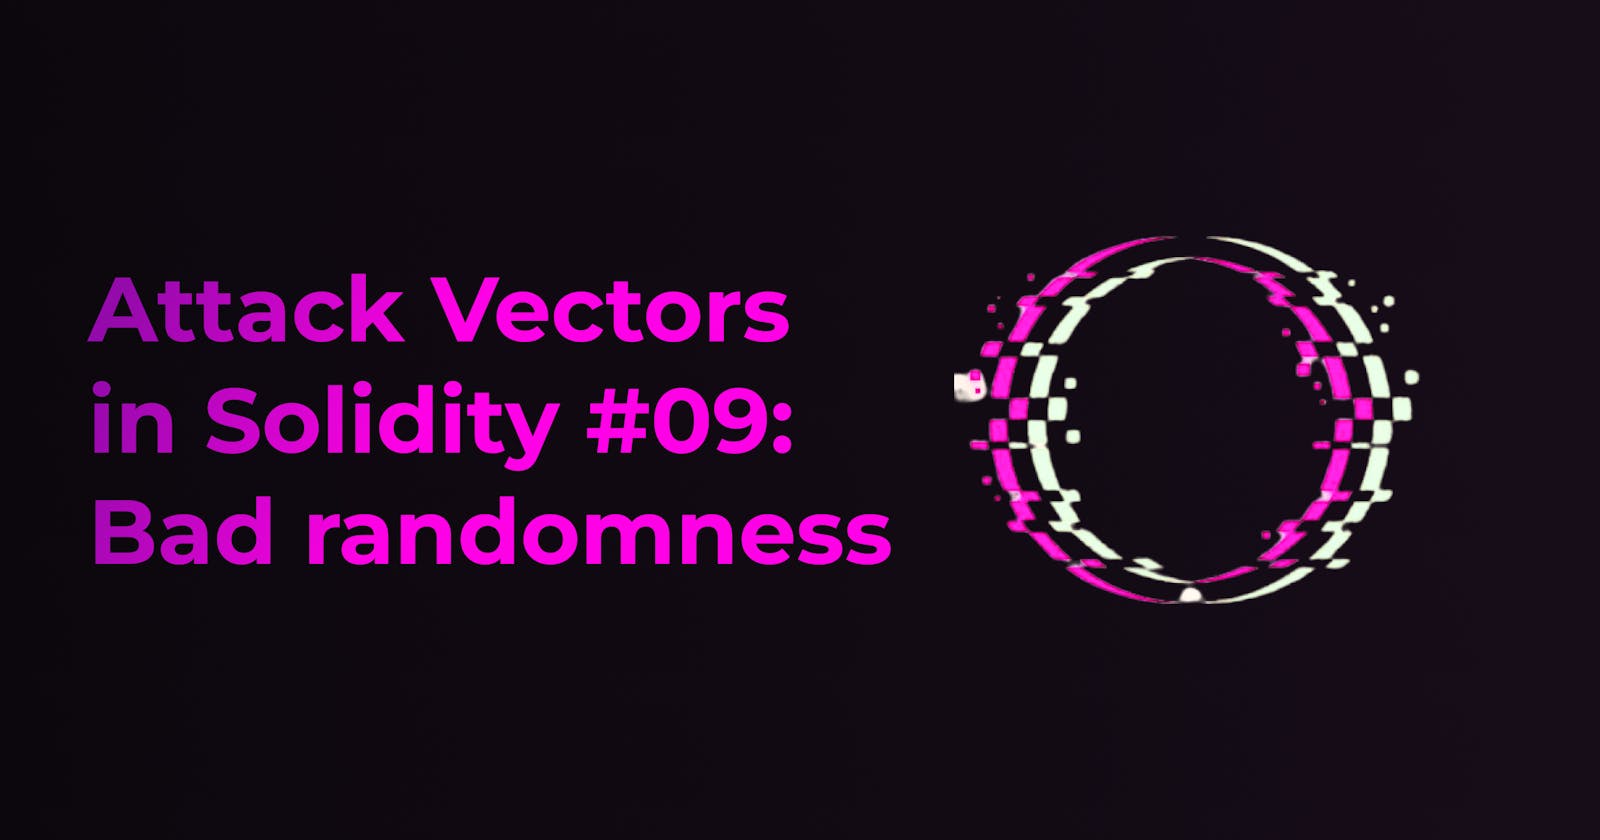 Attack Vectors in Solidity #09: Bad randomness, also known as the "nothing is secret" attack